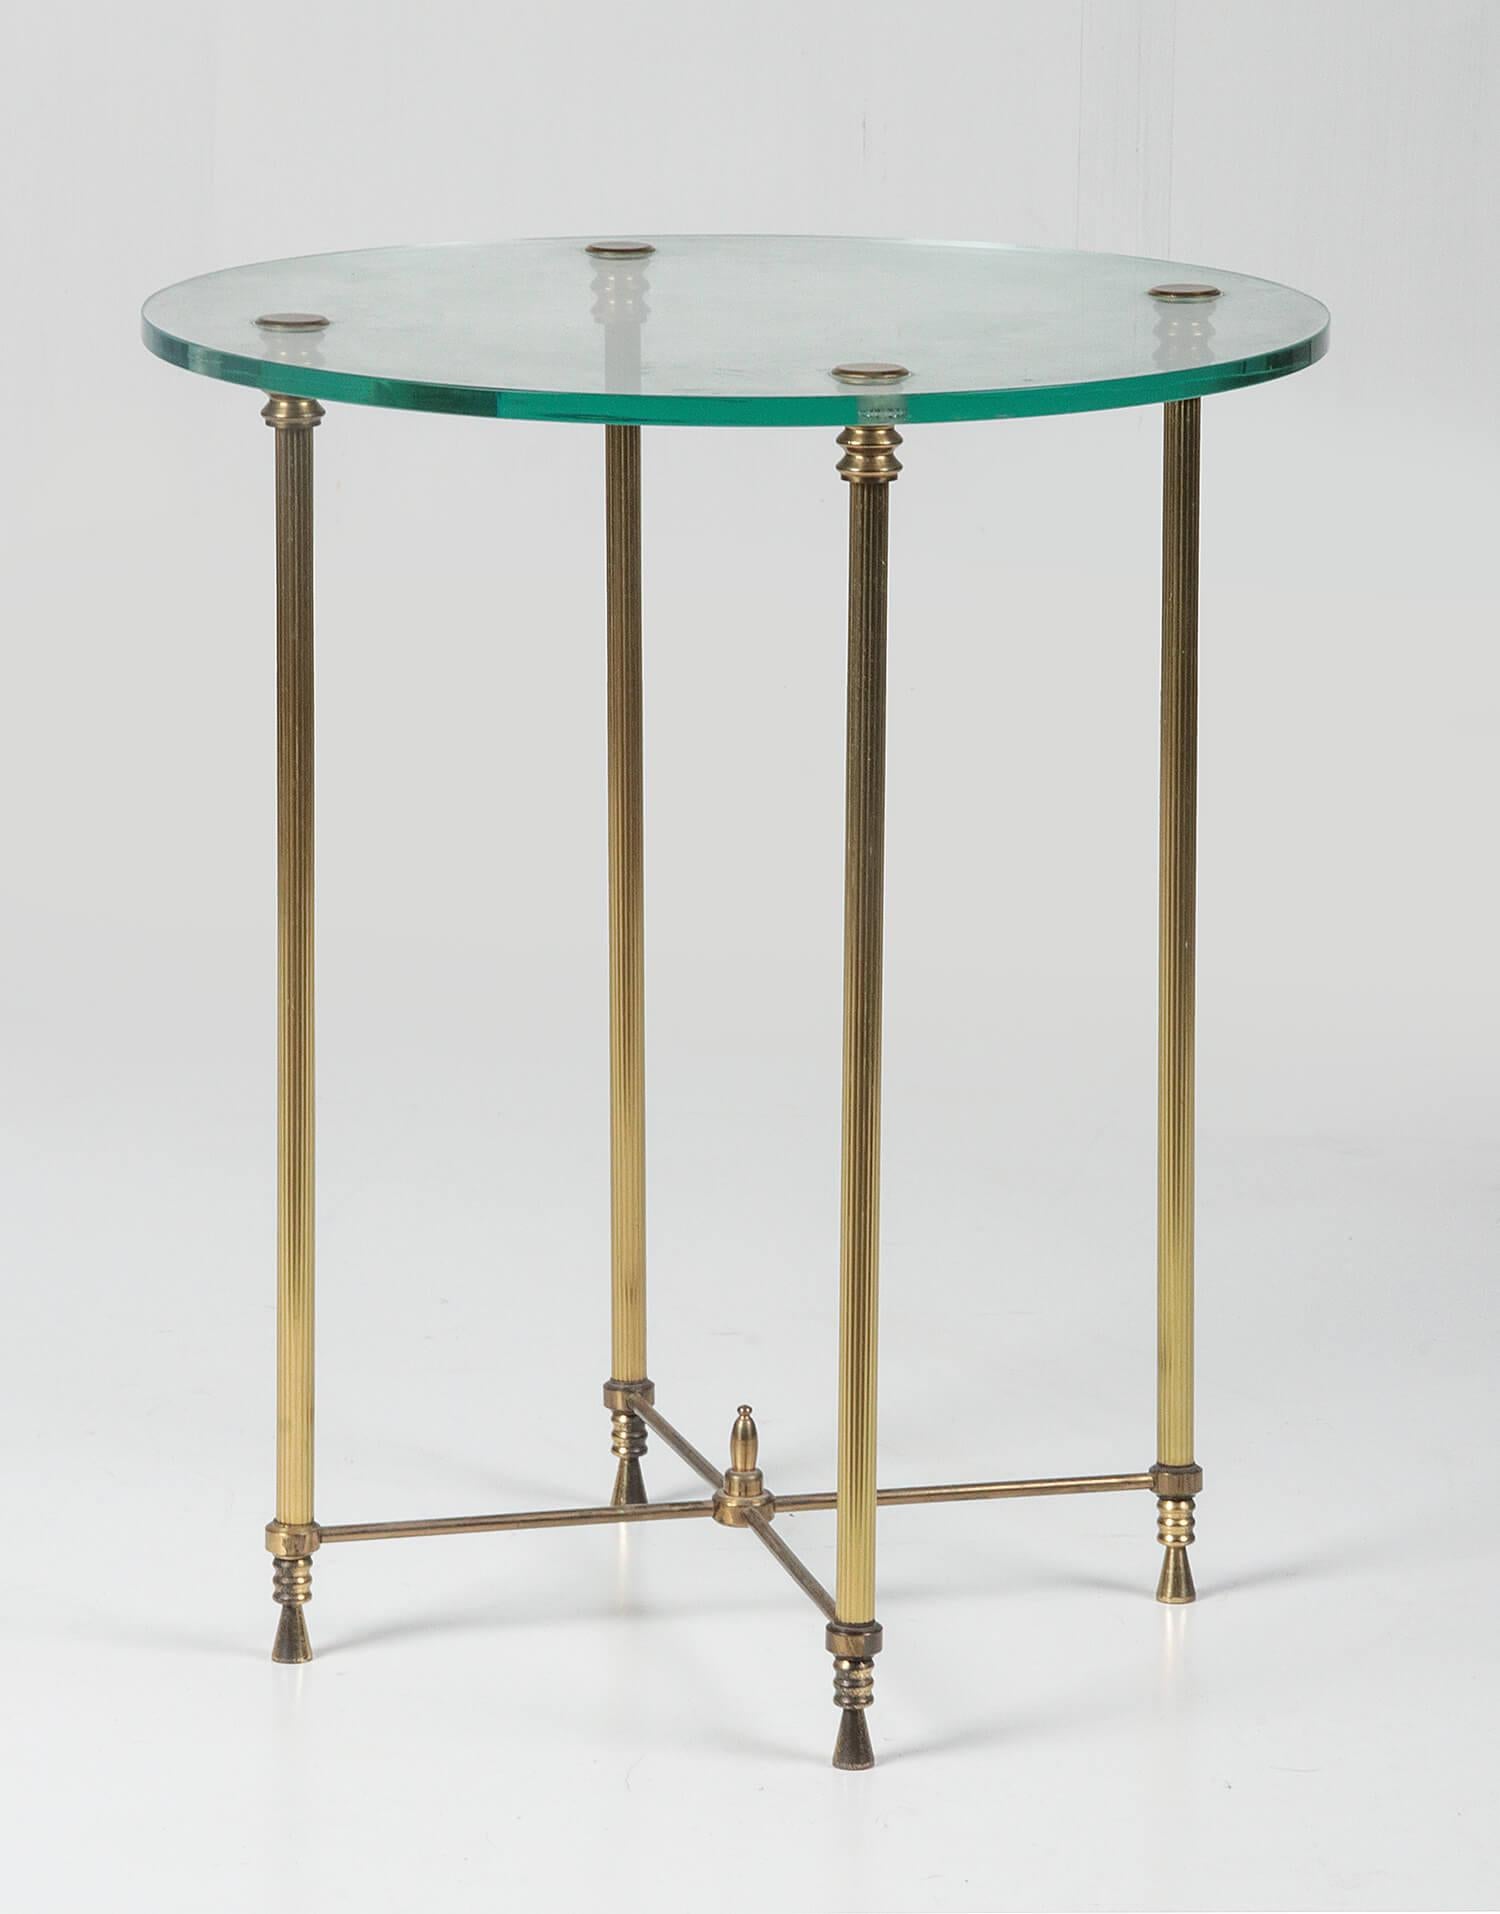 Elegant and graceful side table. It is a round model with a glass top and a copper base. The copperwork has fluted legs. The table can be shipped safely, it is disassembled for that.